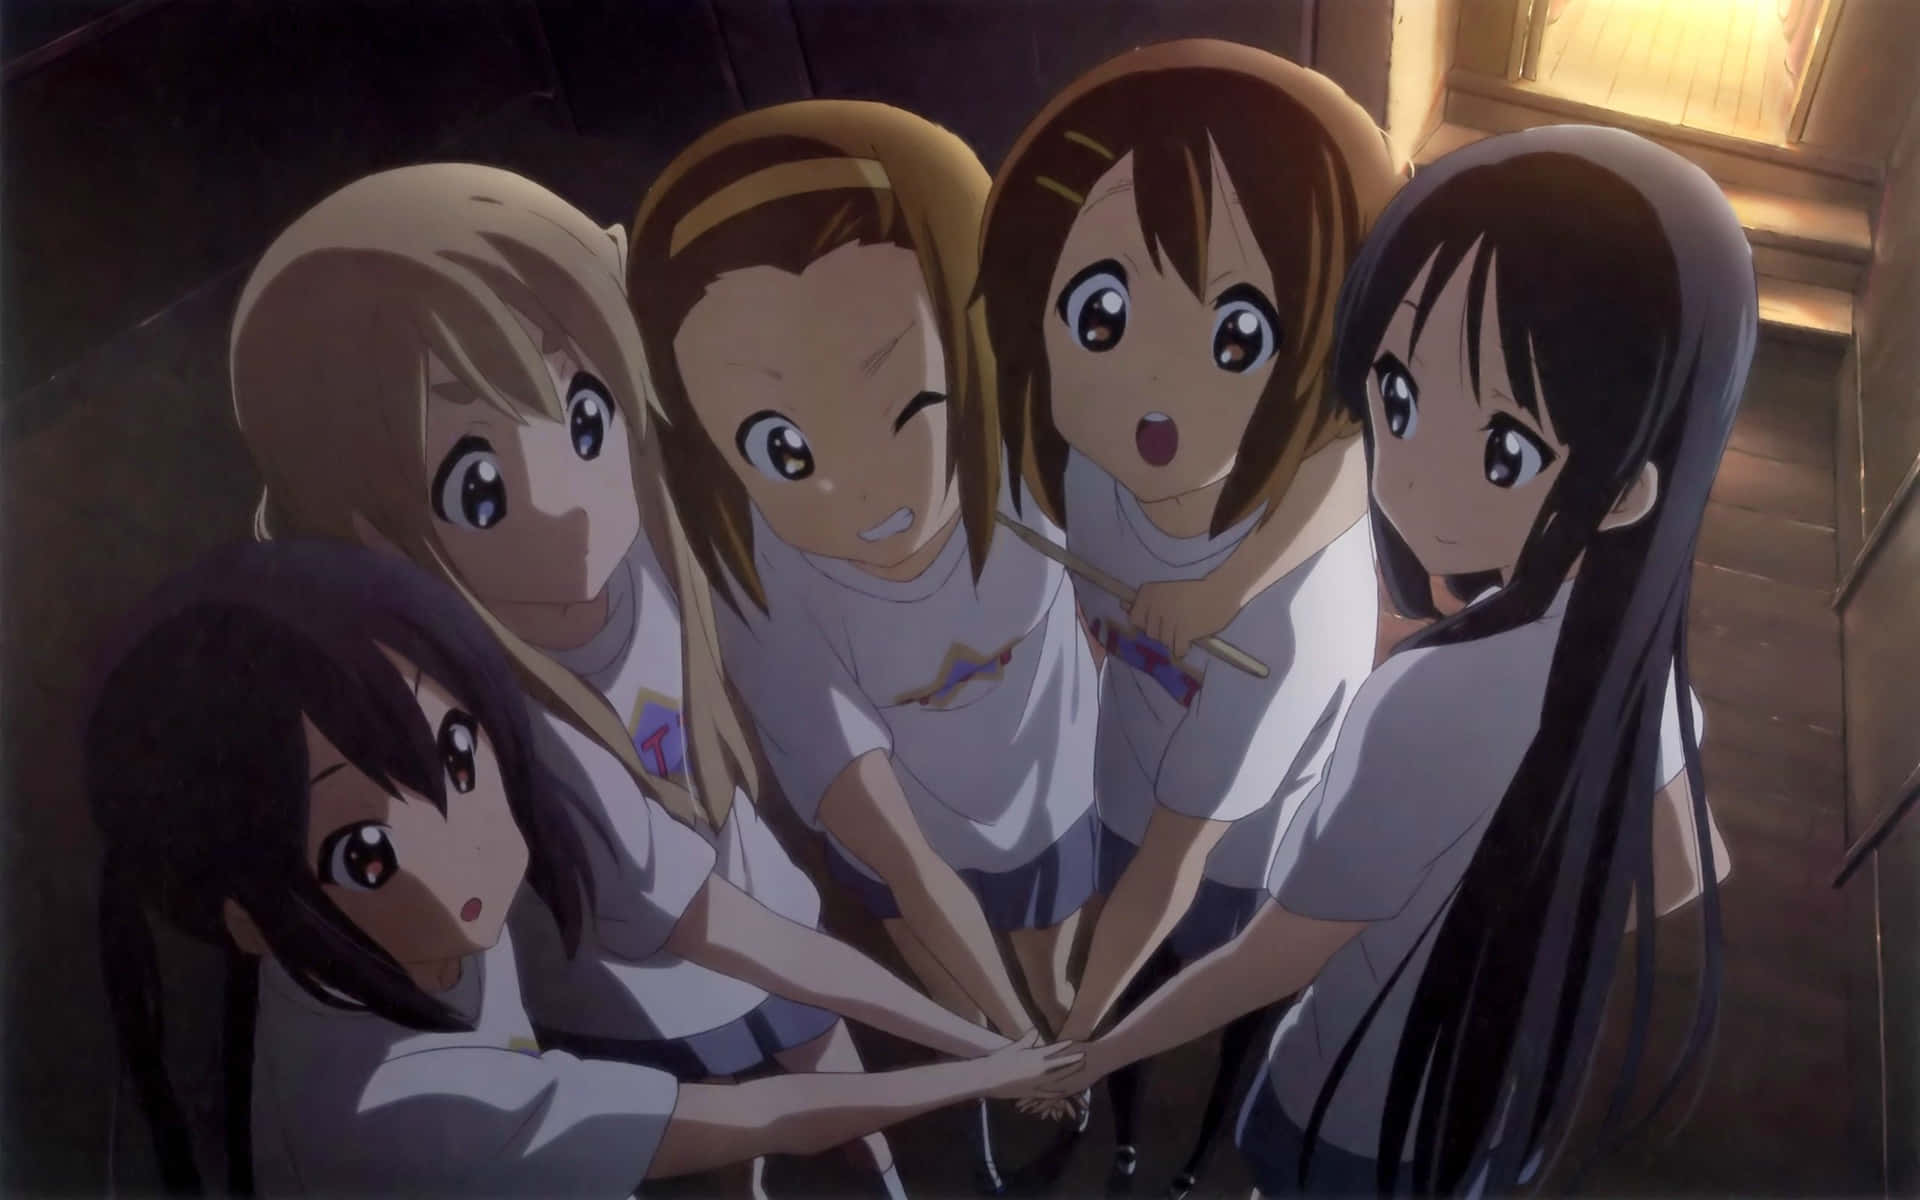 A Group Of Girls Holding Hands In An Anime Setting